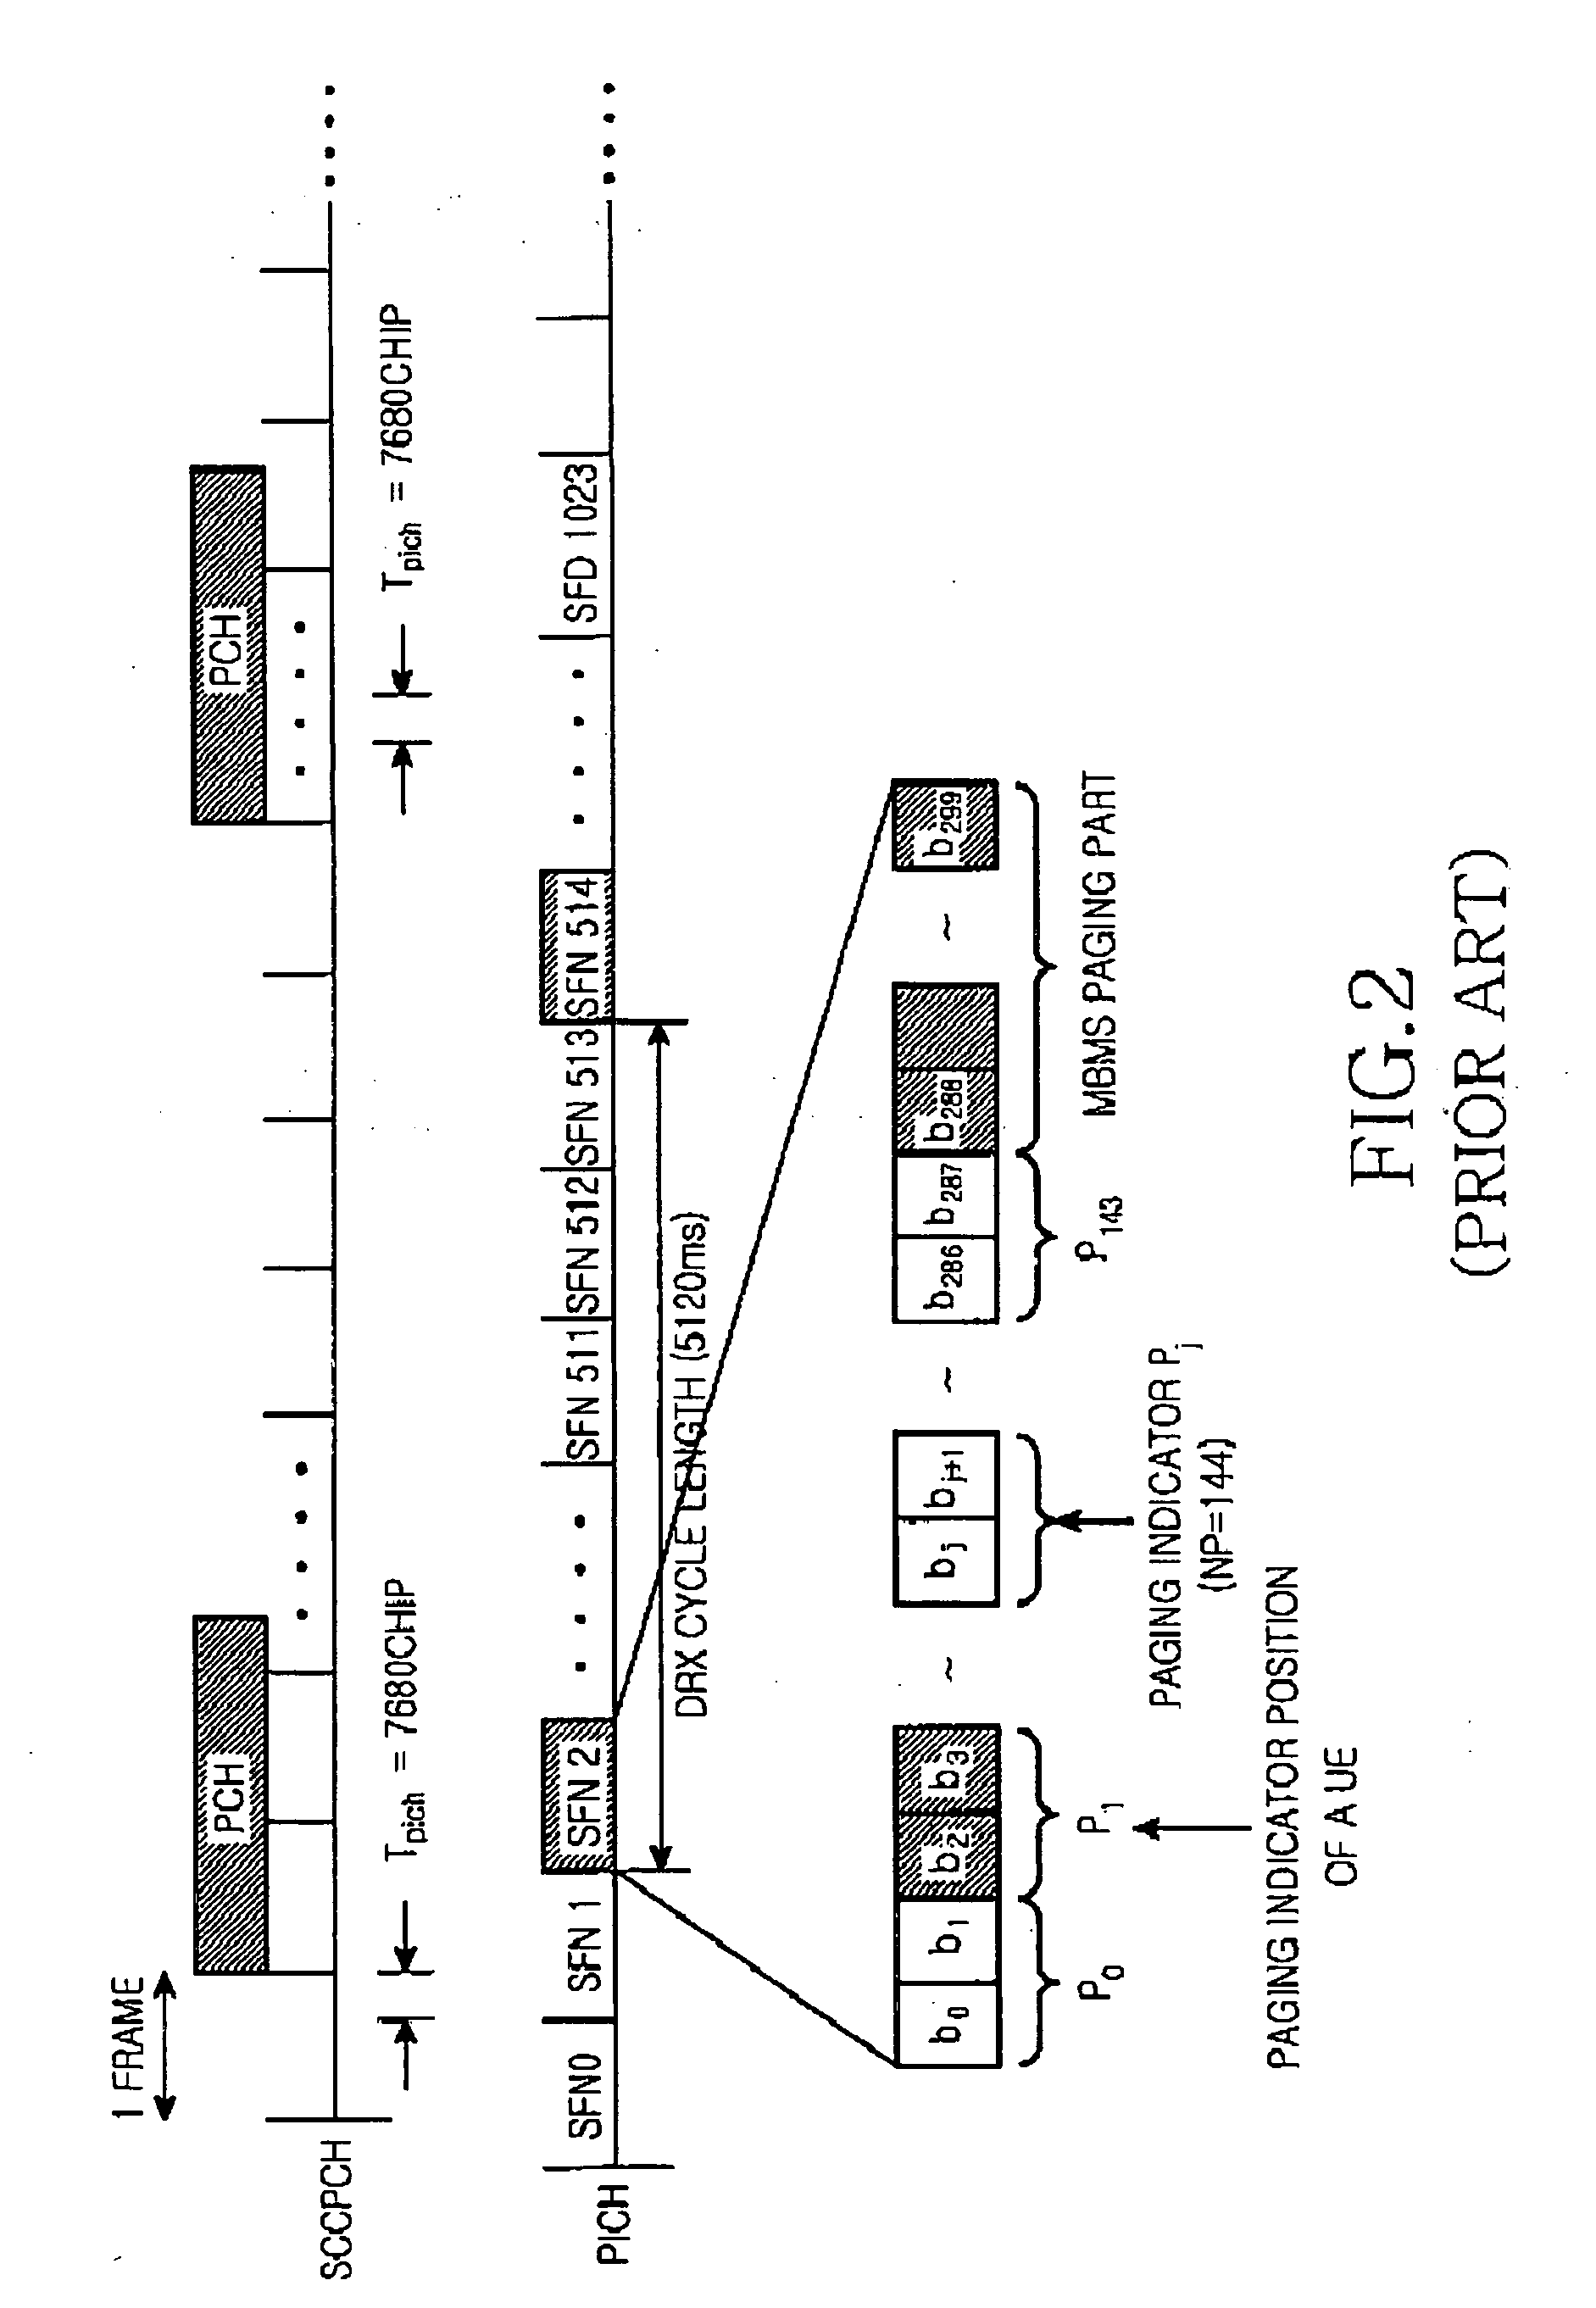 Method for transmitting MBMS paging information in a mobile communication system